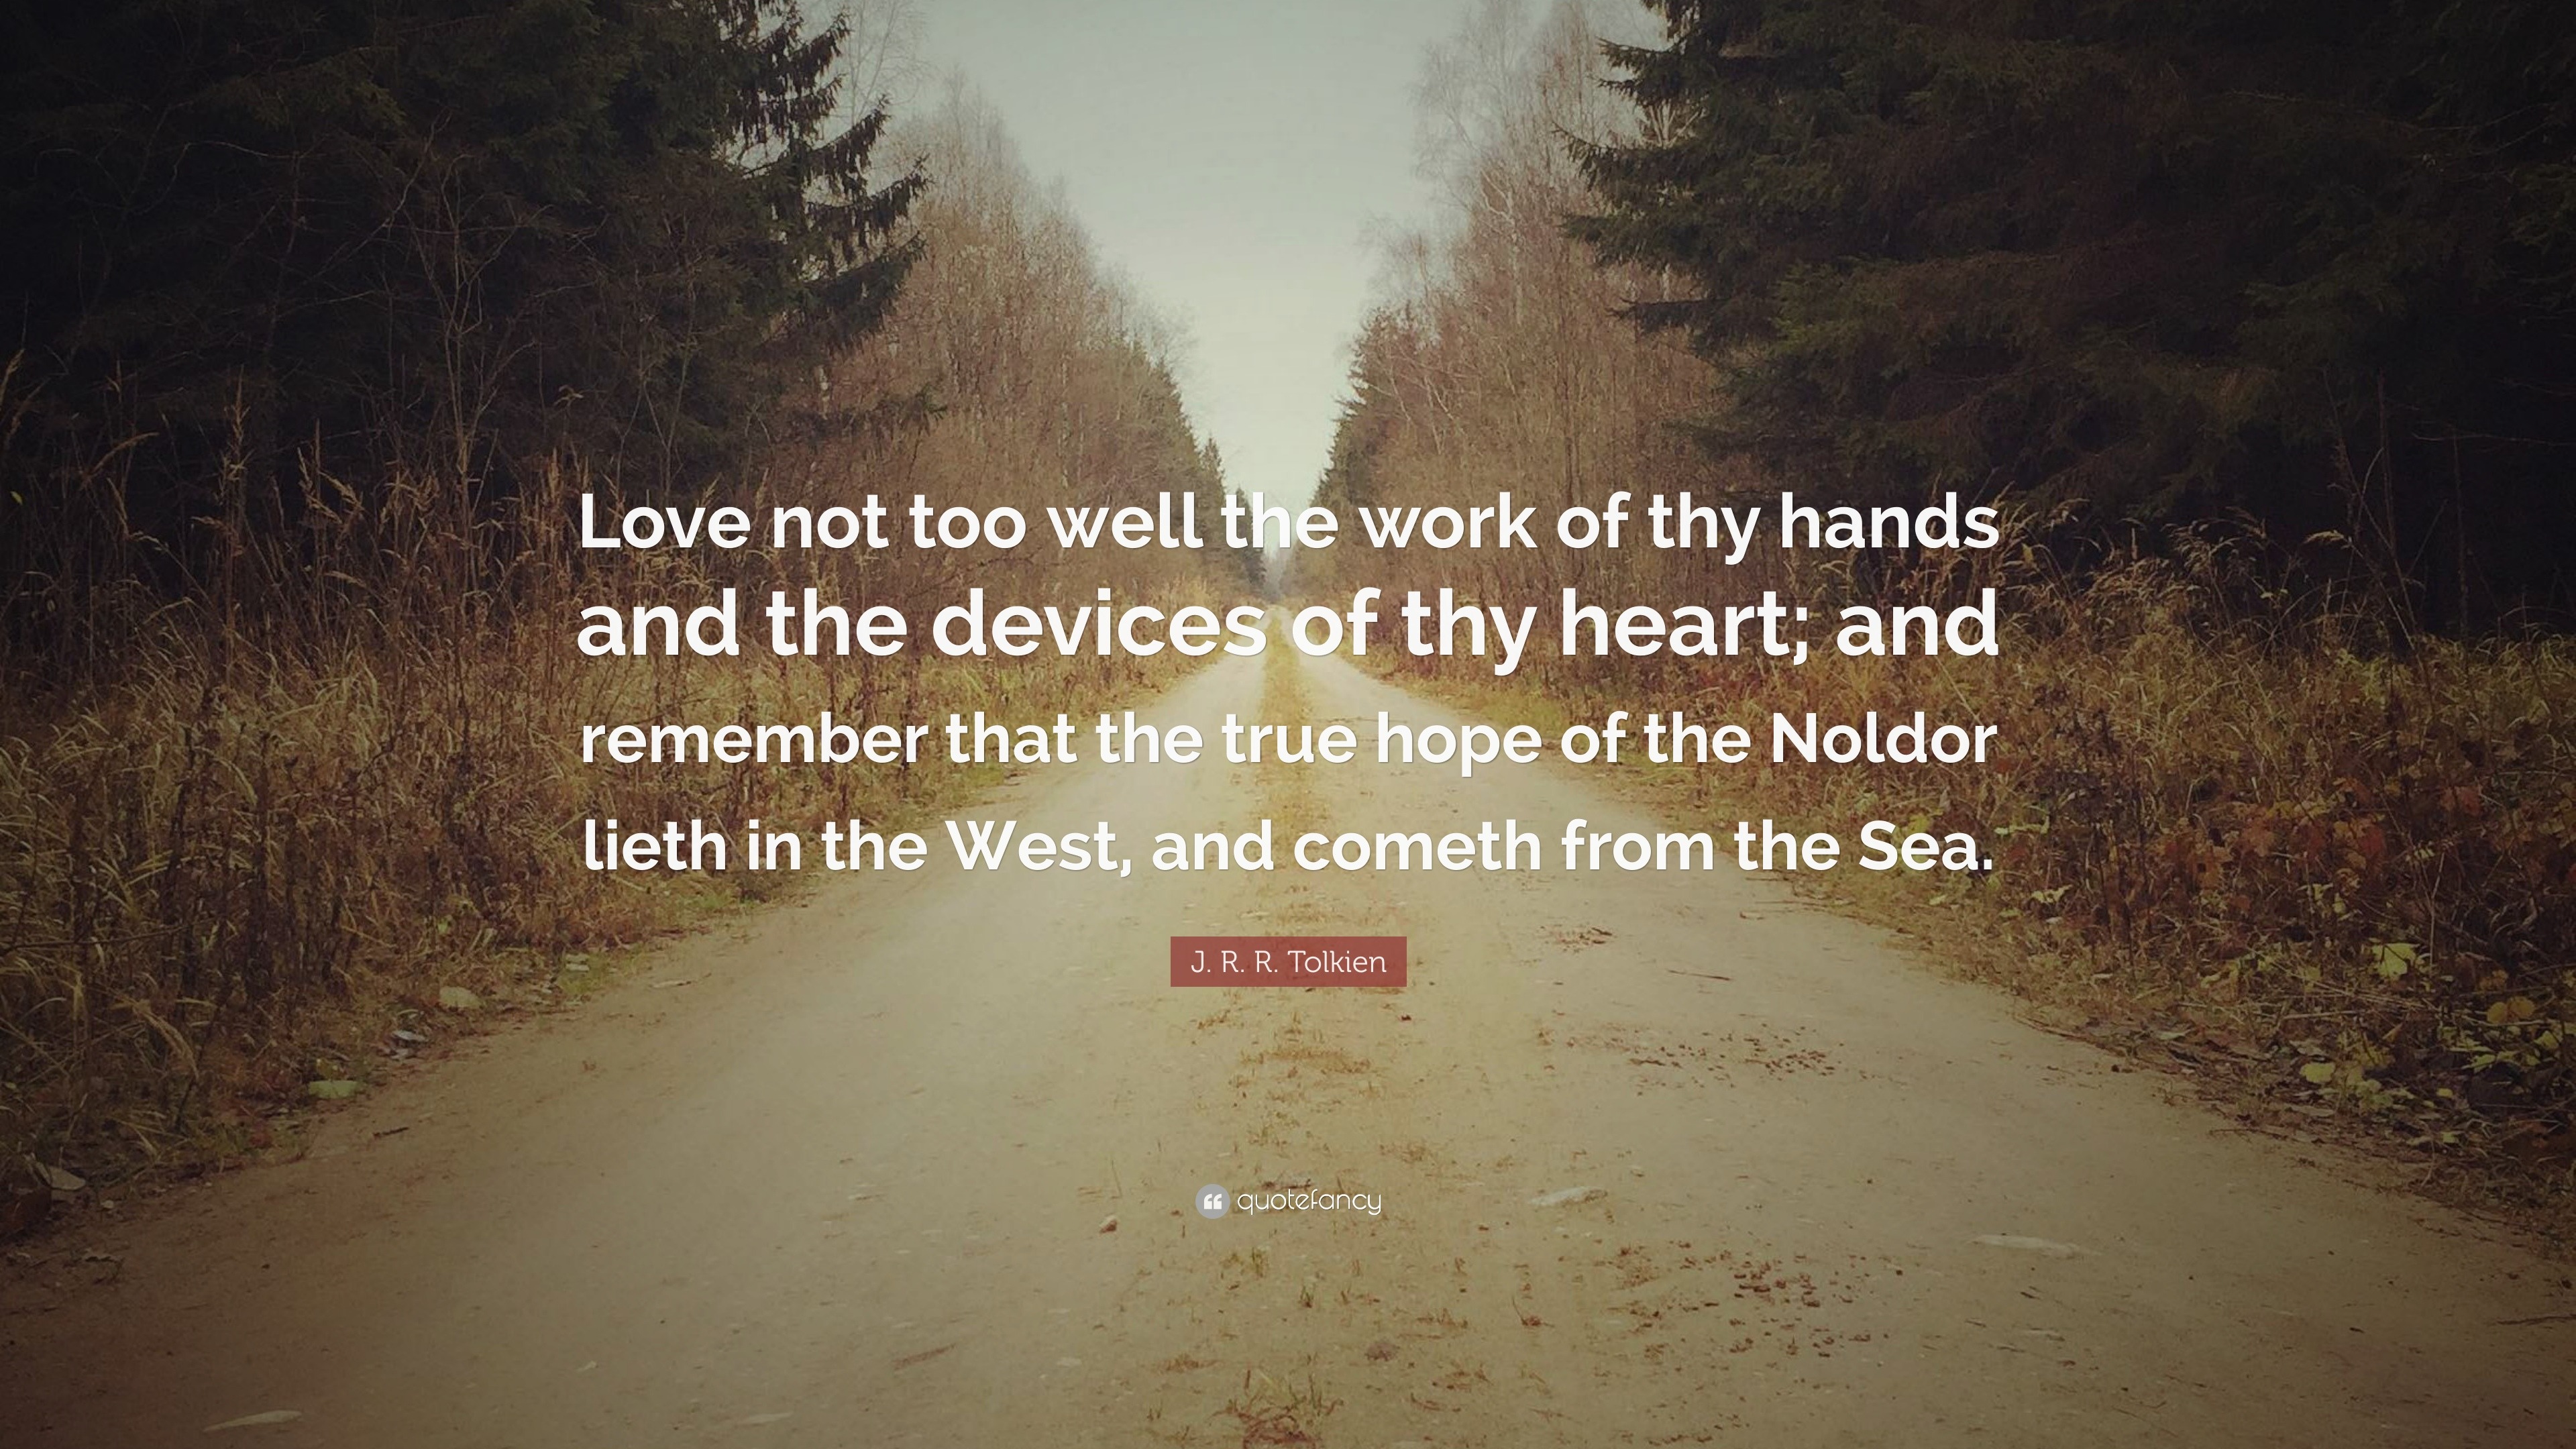 J. R. R. Tolkien Quote: “Love not too well the work of thy hands and